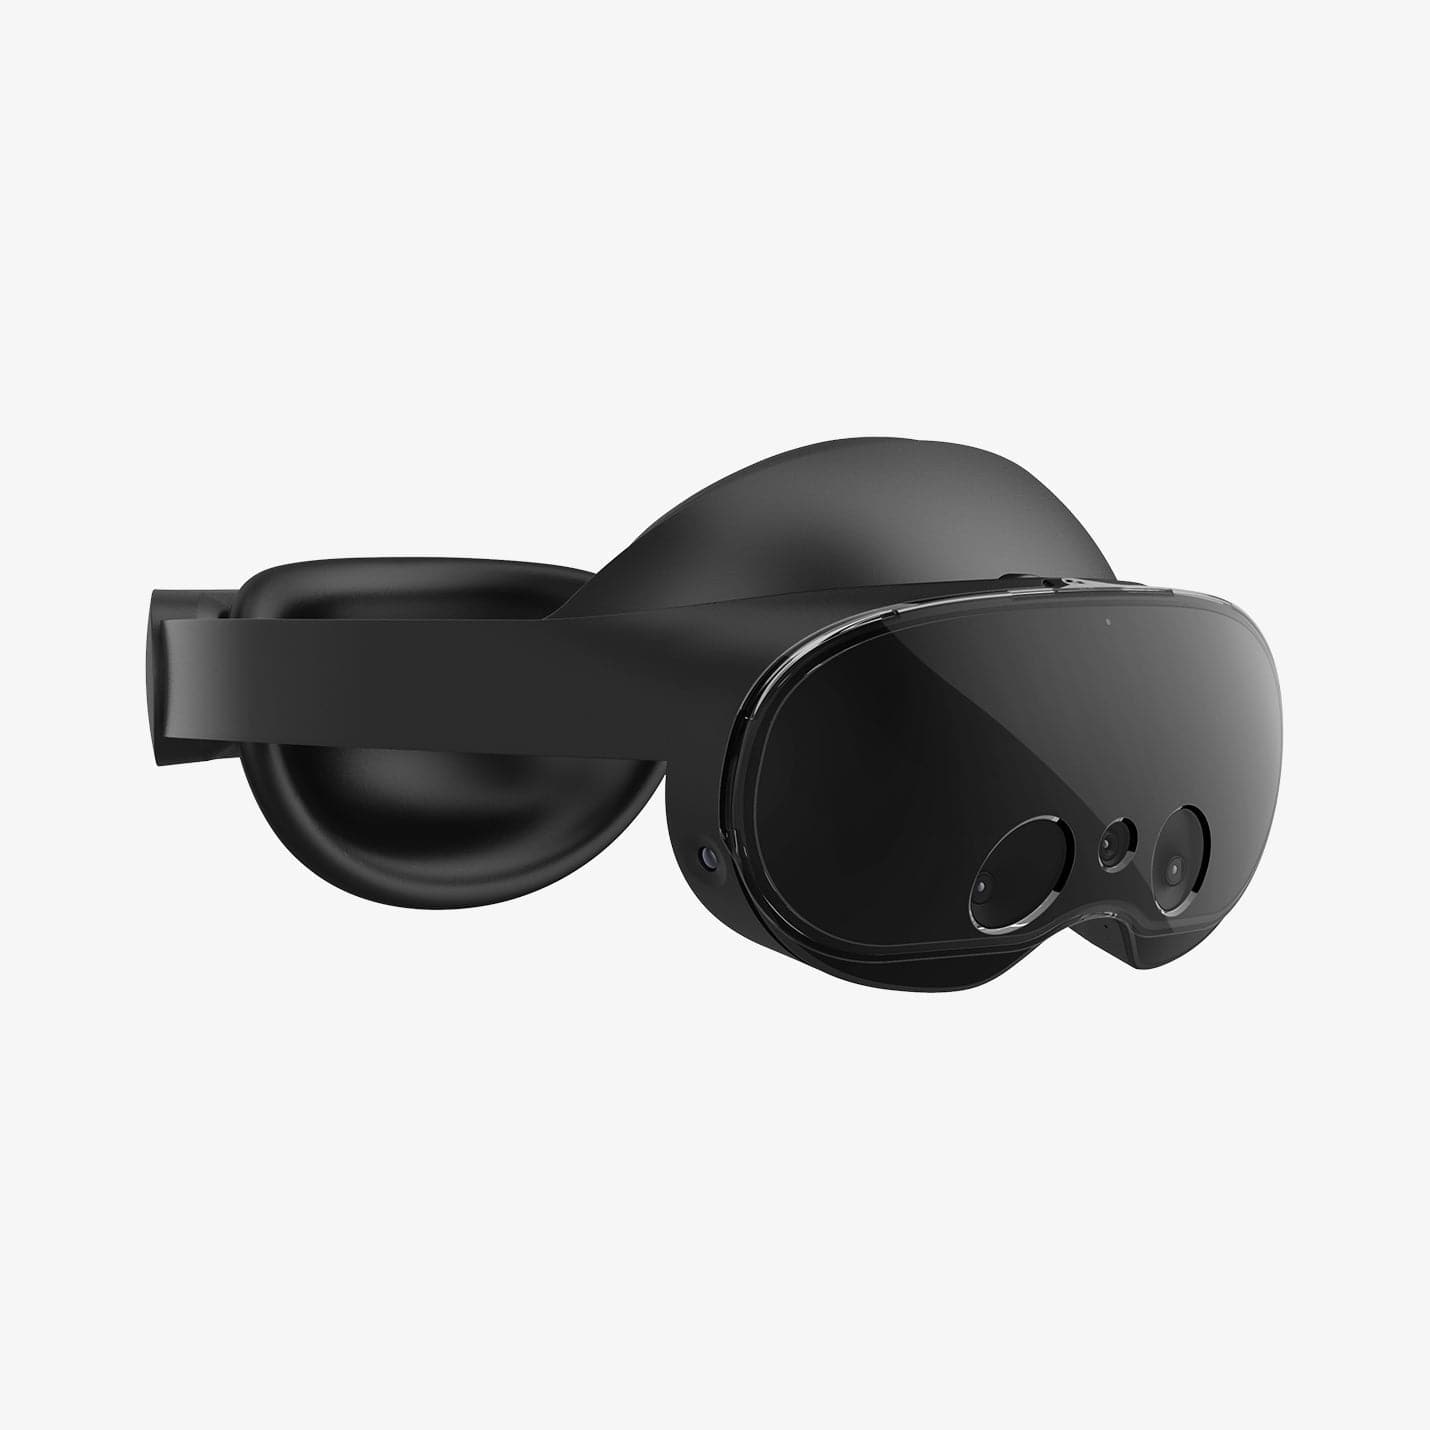 ACS06029 - Meta Quest Pro Ultra Hybrid Pro VR Lens Cover in royal black showing the front and side